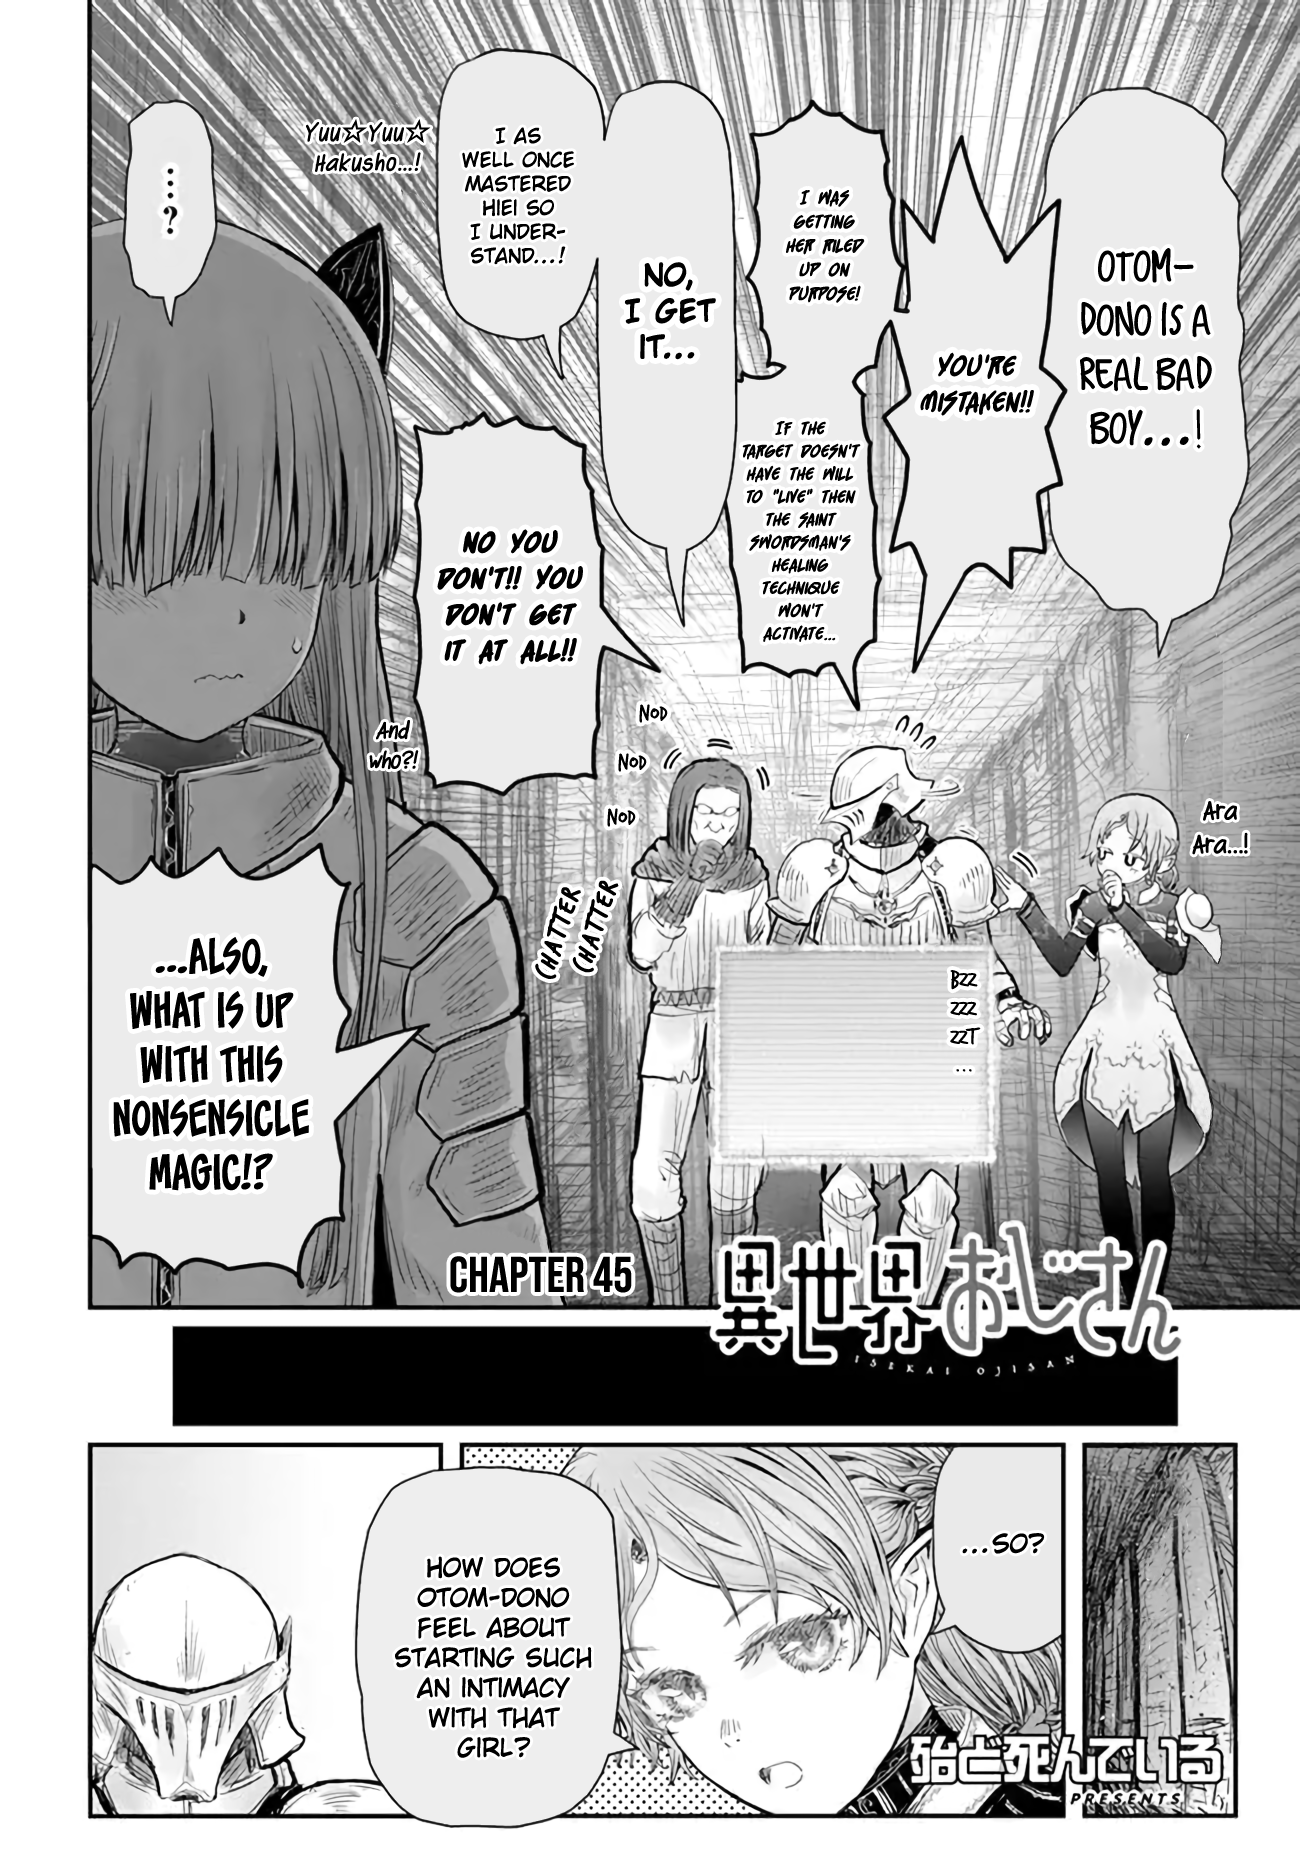 Uncle from Another World, Chapter 49 - Uncle from Another World Manga Online